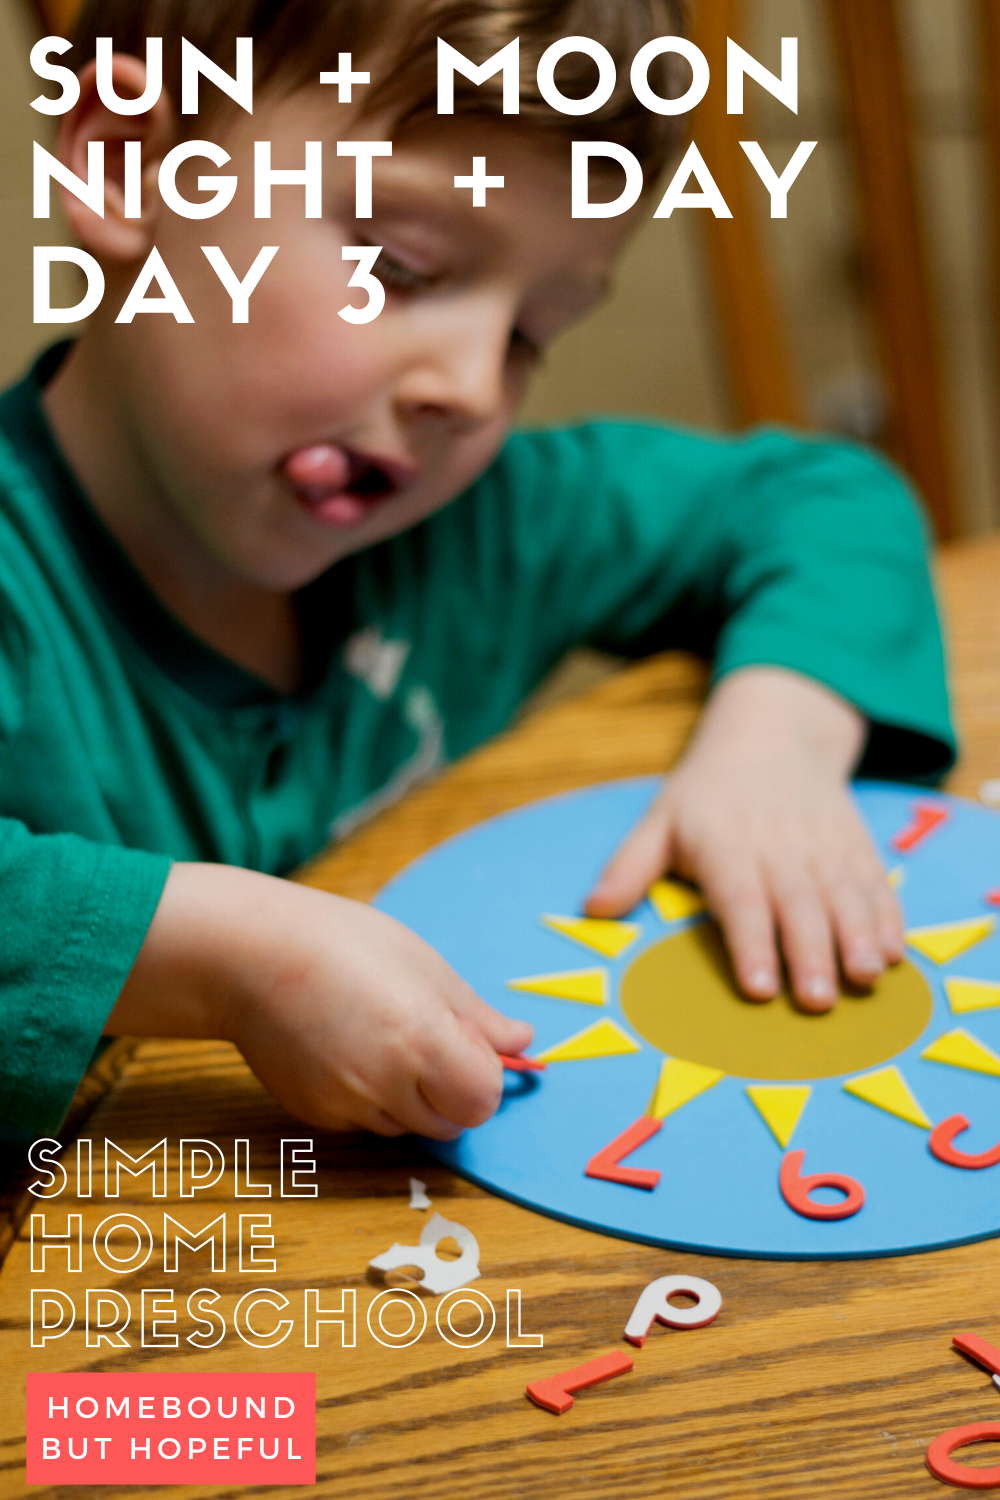 Don't miss all the hands-on fun we had learning about daytime during our home preschool! #homeschool #totschool #handsonlearning